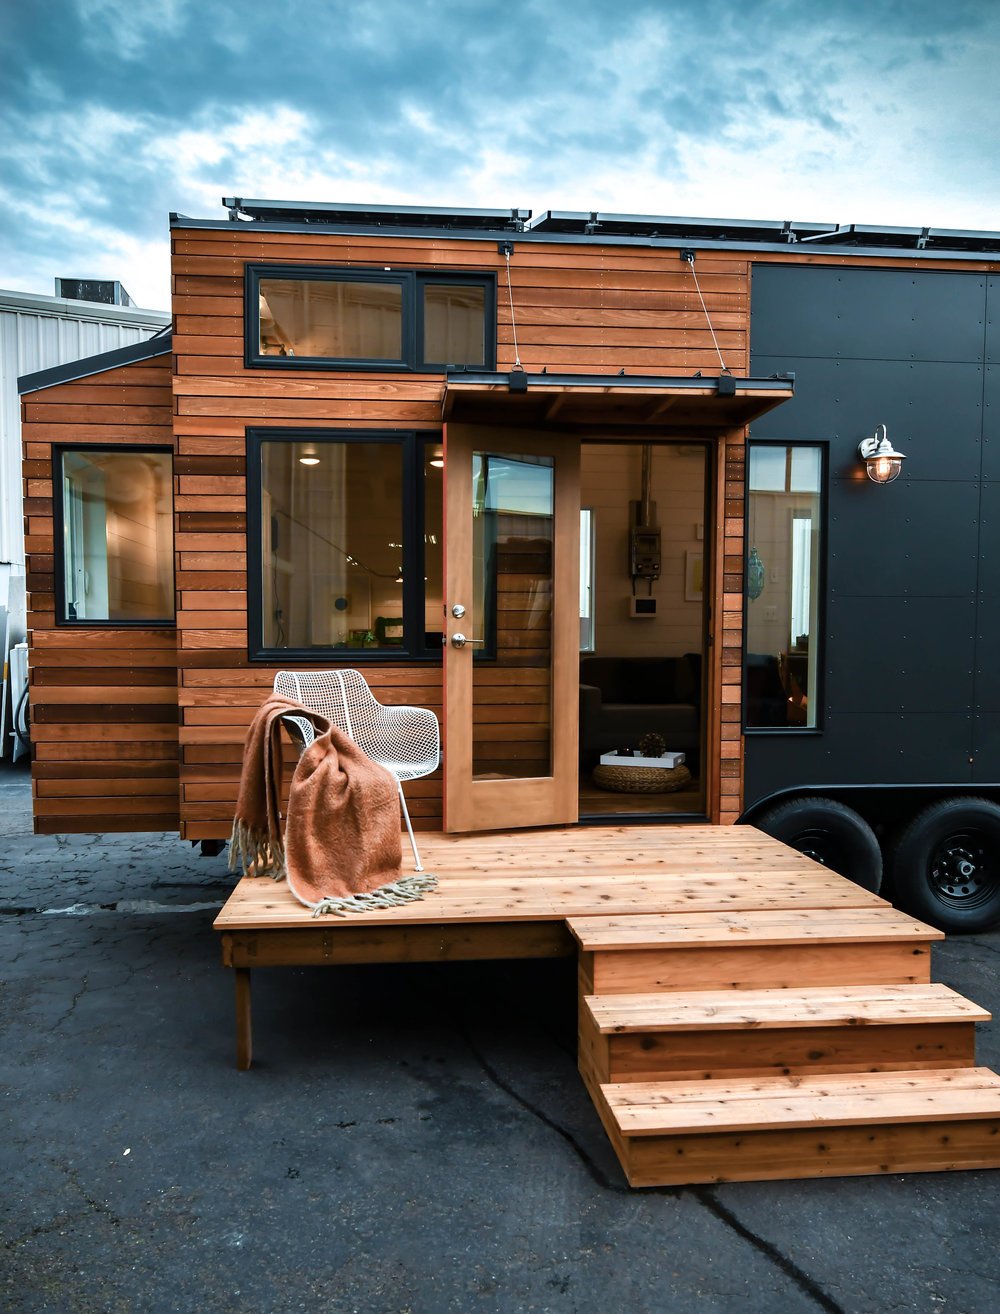 Best Tiny Homes For Sale in Michigan — Prefab Review